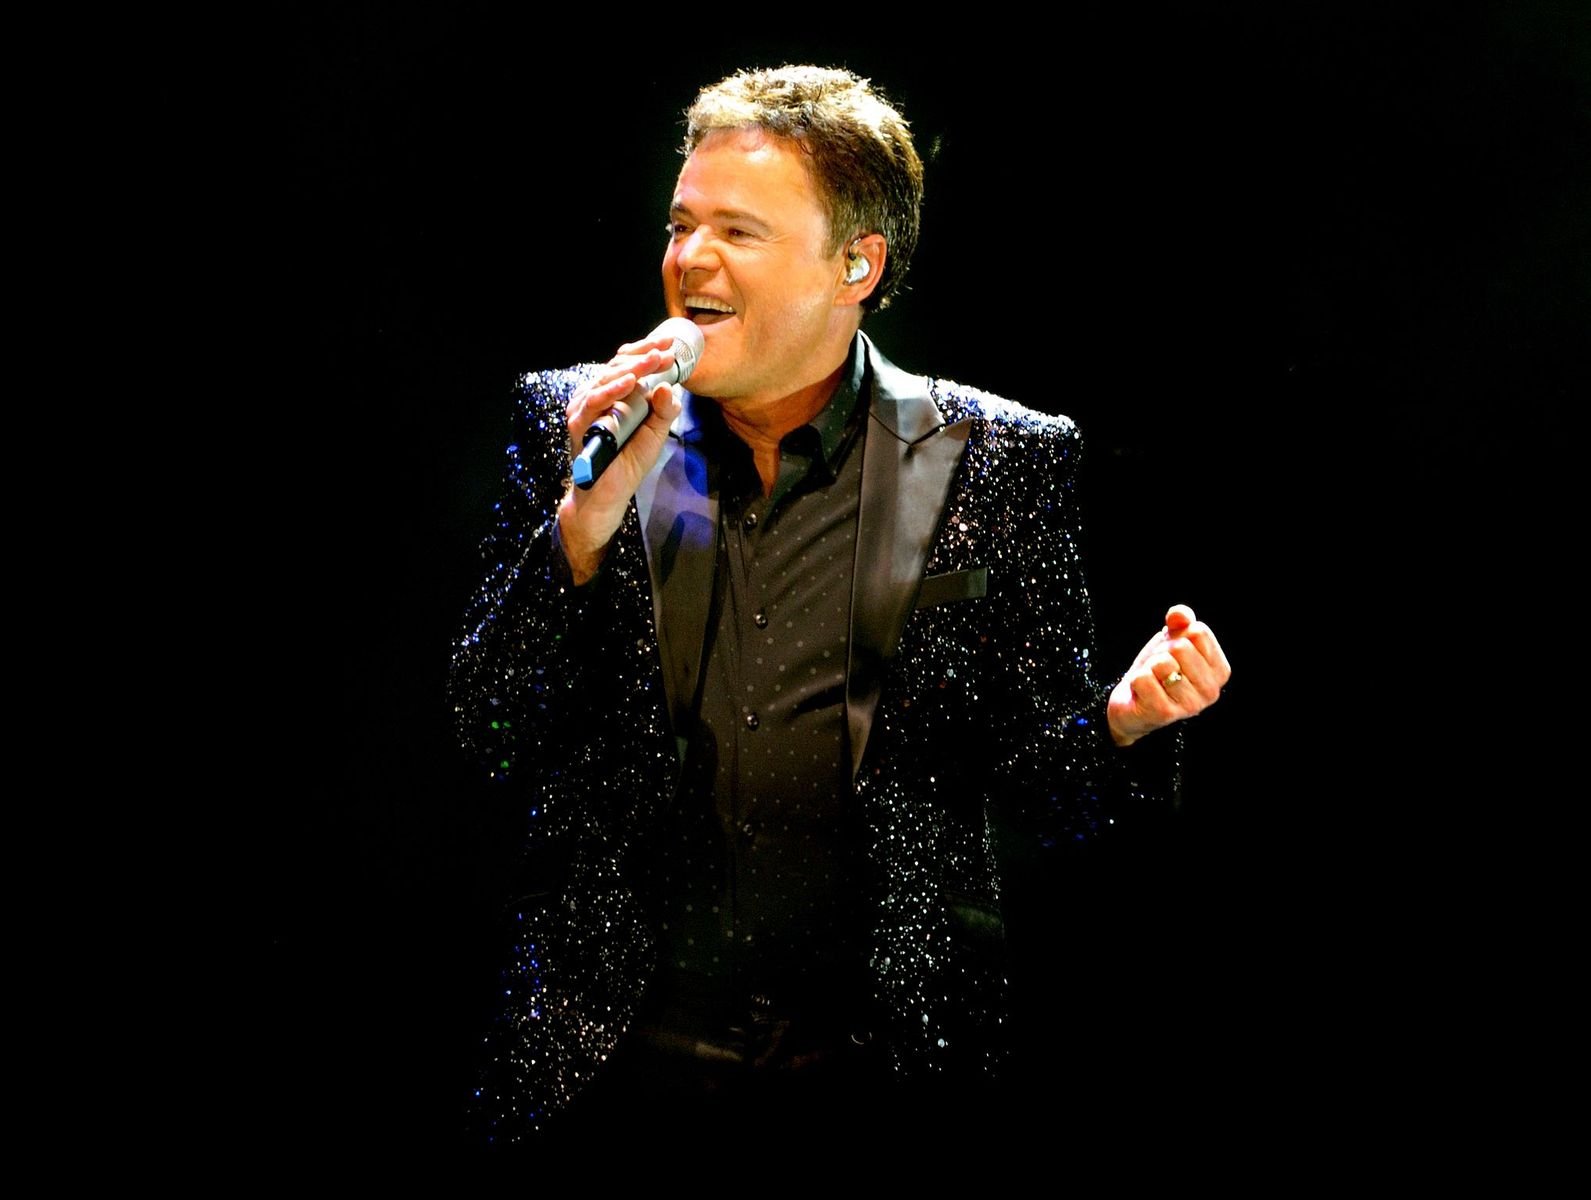 Donny Osmond on stage at Manchester Arena on January 21, 2017 | Photo: Getty Images